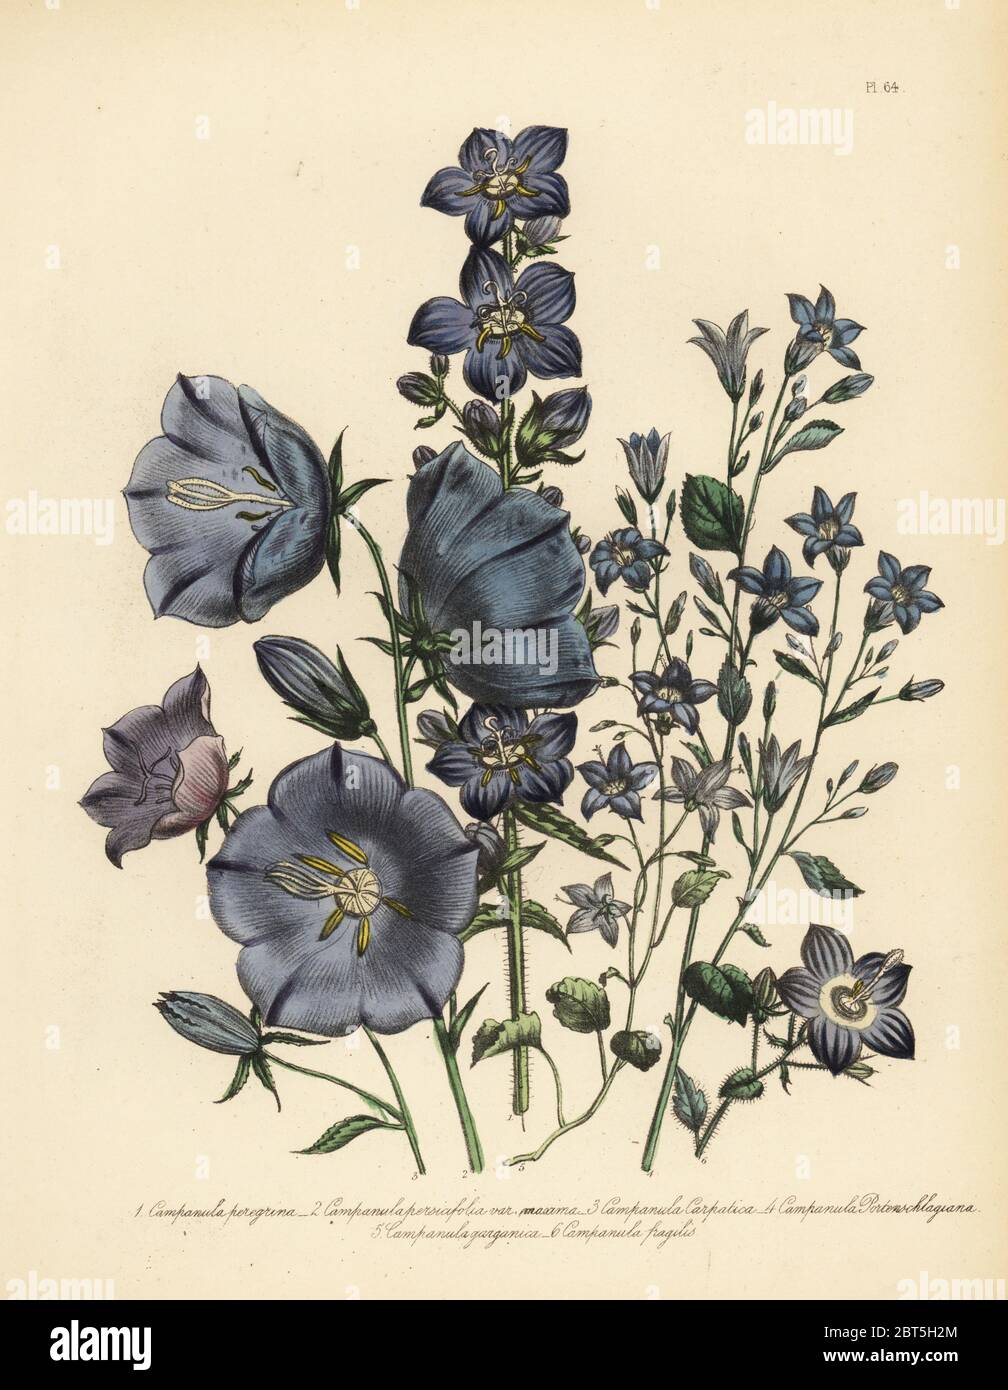 Wandering bellflower, Campanula peregrina, large-flowered peach-leaved campanula, C. persicifolia, Carpathian bellflower, C. carpatica, Dalmatian or wall campanula, C. portenschlagiana, Garganian bellflower, C. garganica, and brittle campanula, C. fragilis. Handfinished chromolithograph by Henry Noel Humphreys after an illustration by Jane Loudon from Mrs. Jane Loudon's Ladies Flower Garden of Ornamental Perennials, William S. Orr, London, 1849. Stock Photo